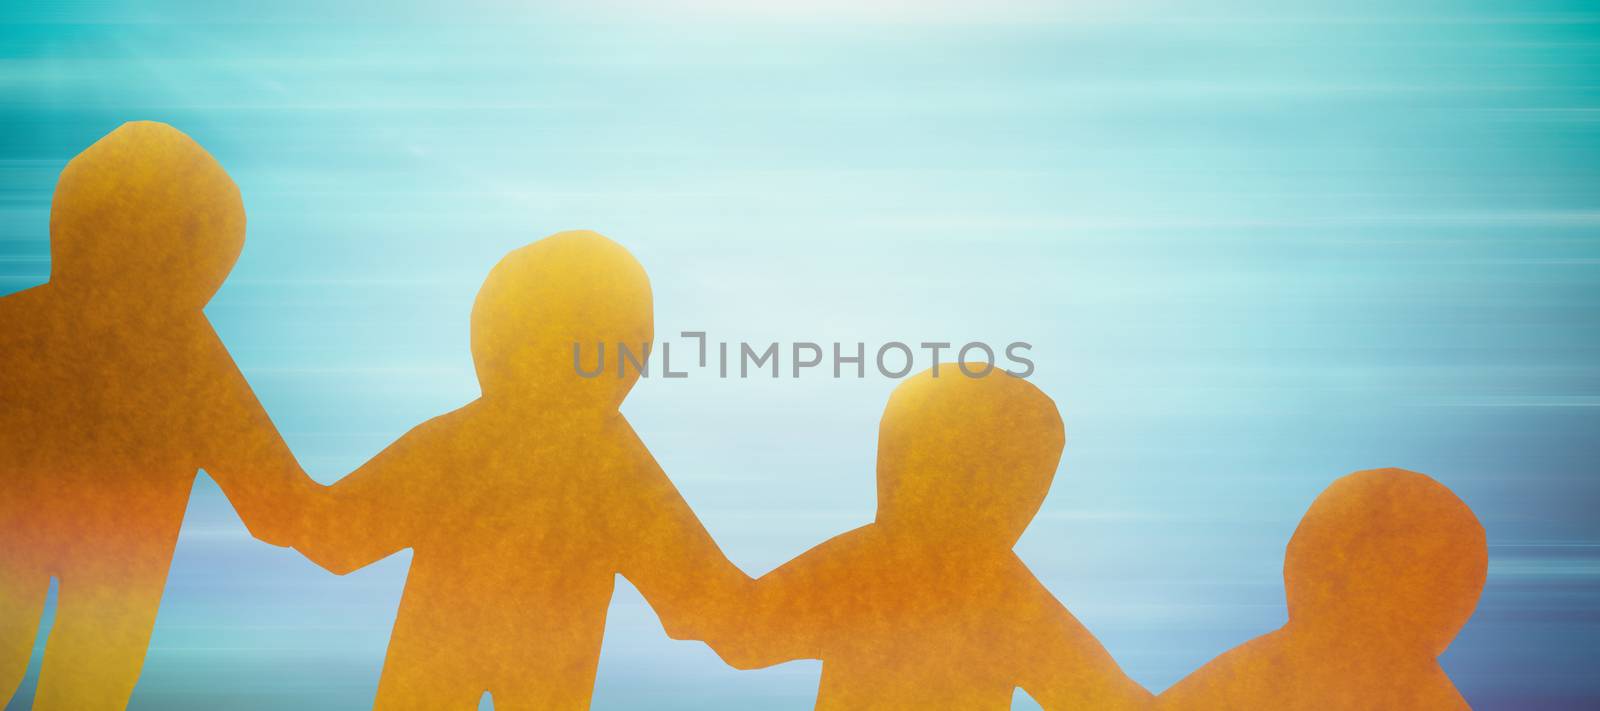 little yellow person against blue abstract image